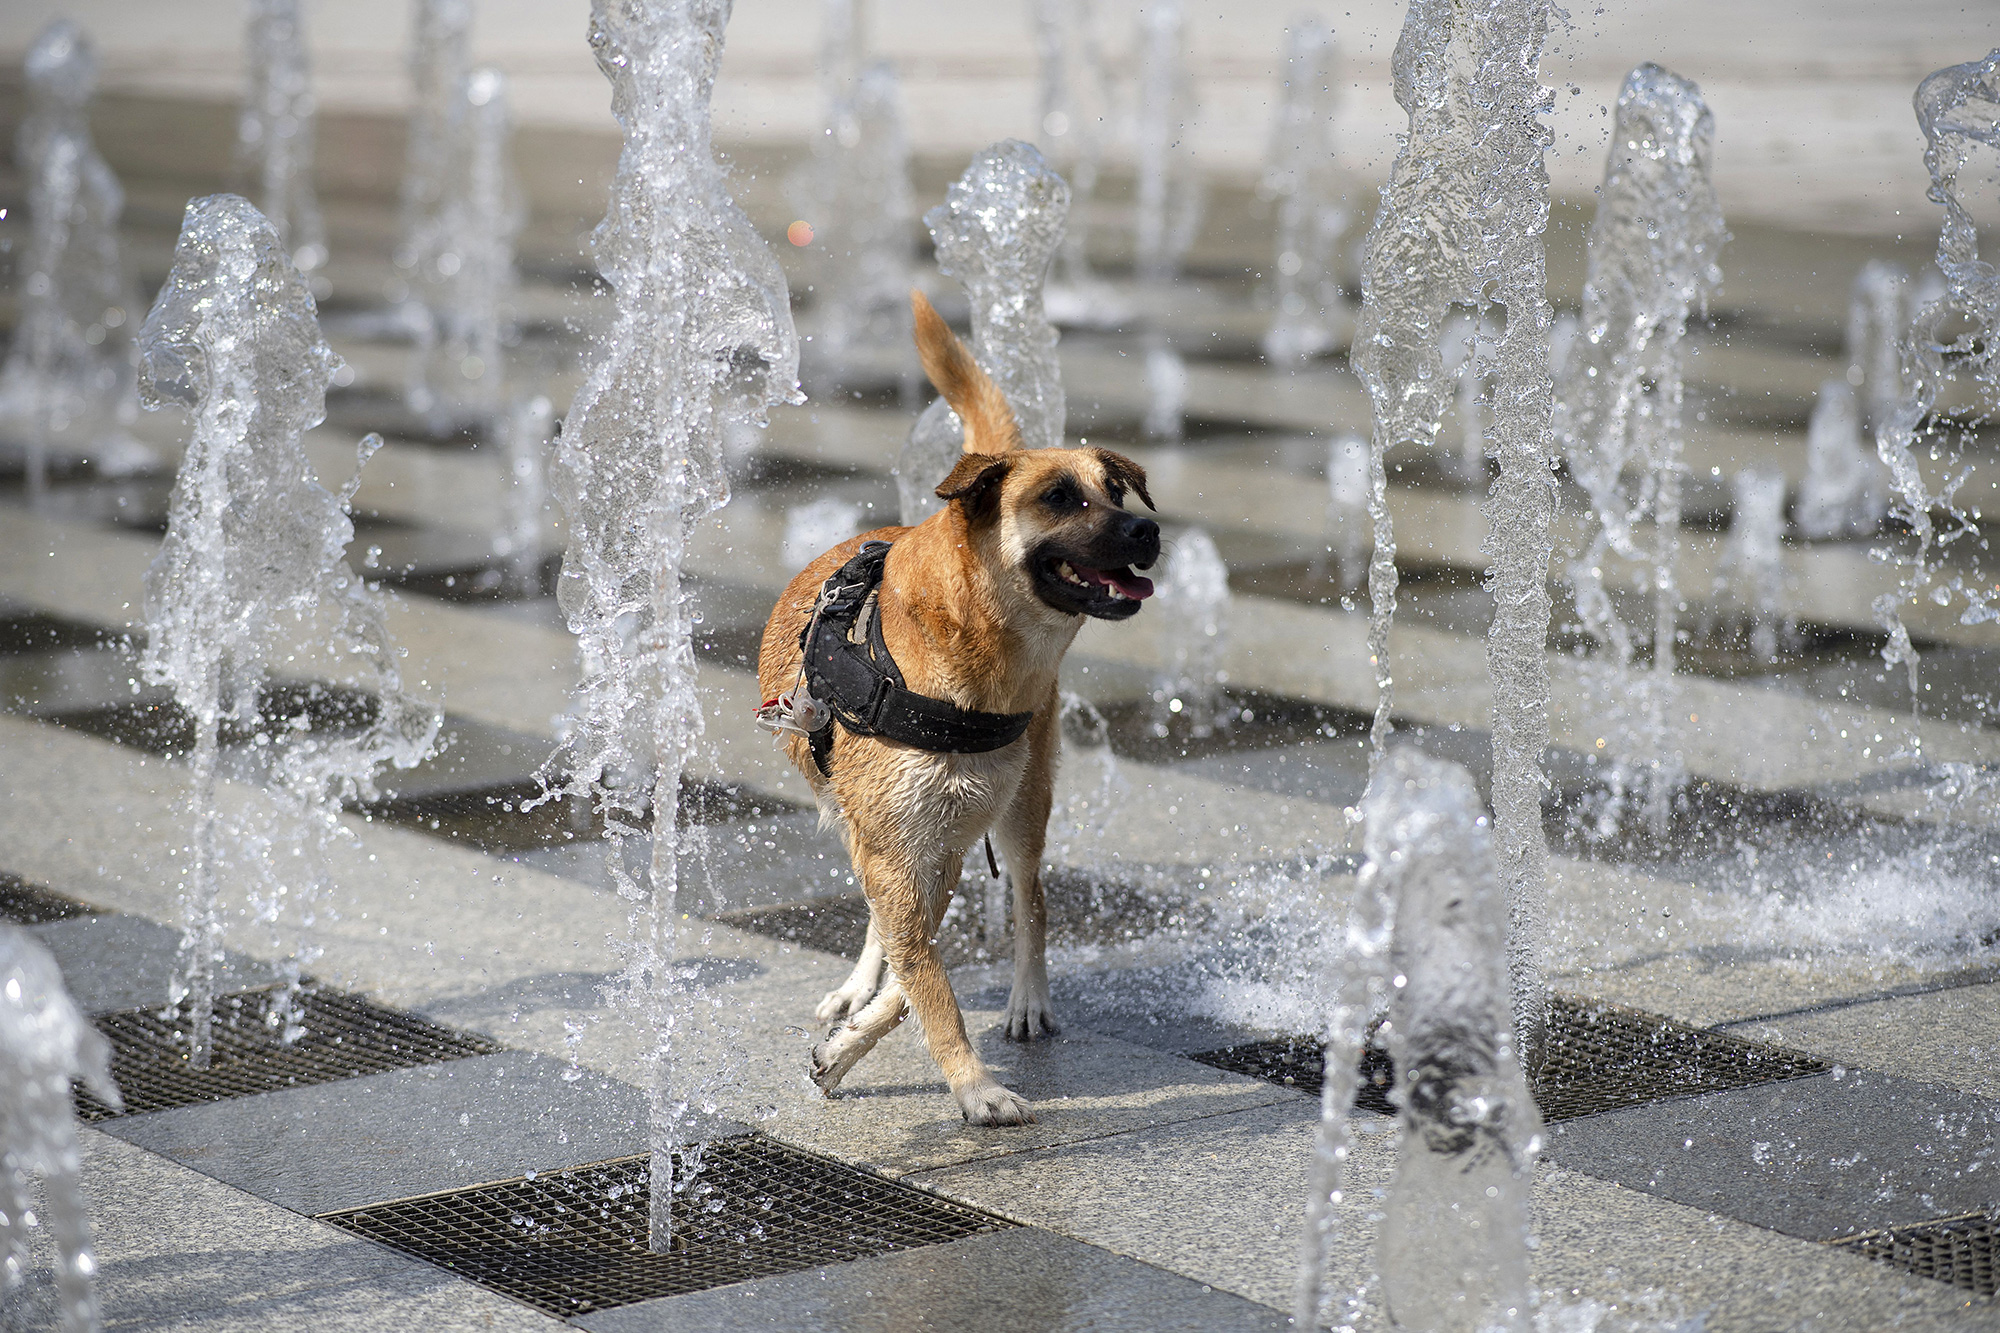 A dog refreshes with water jets in Brest, located in western France, on Monday, July 18.